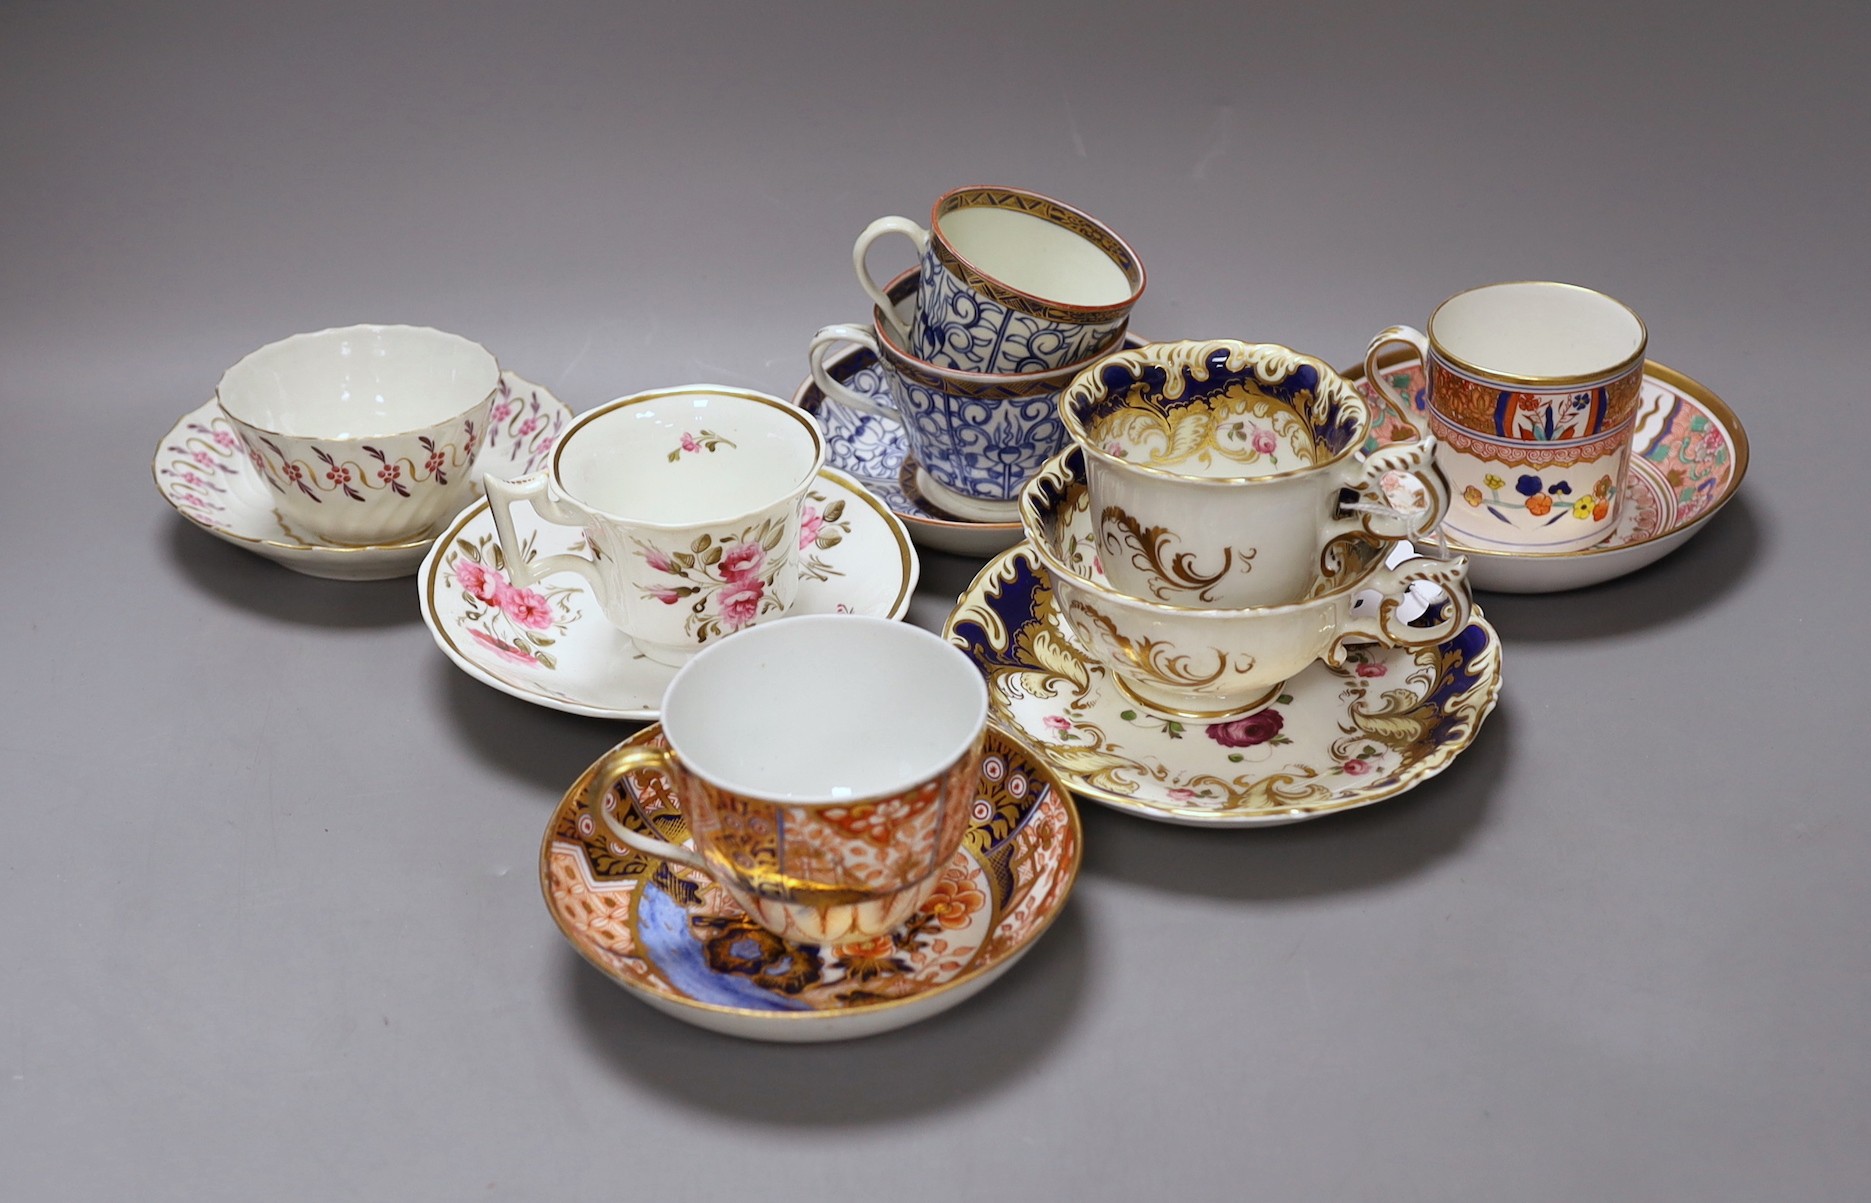 A Spode Imari pattern coffee can and saucer, a Coalport Imari cup and saucer, a Coalport style